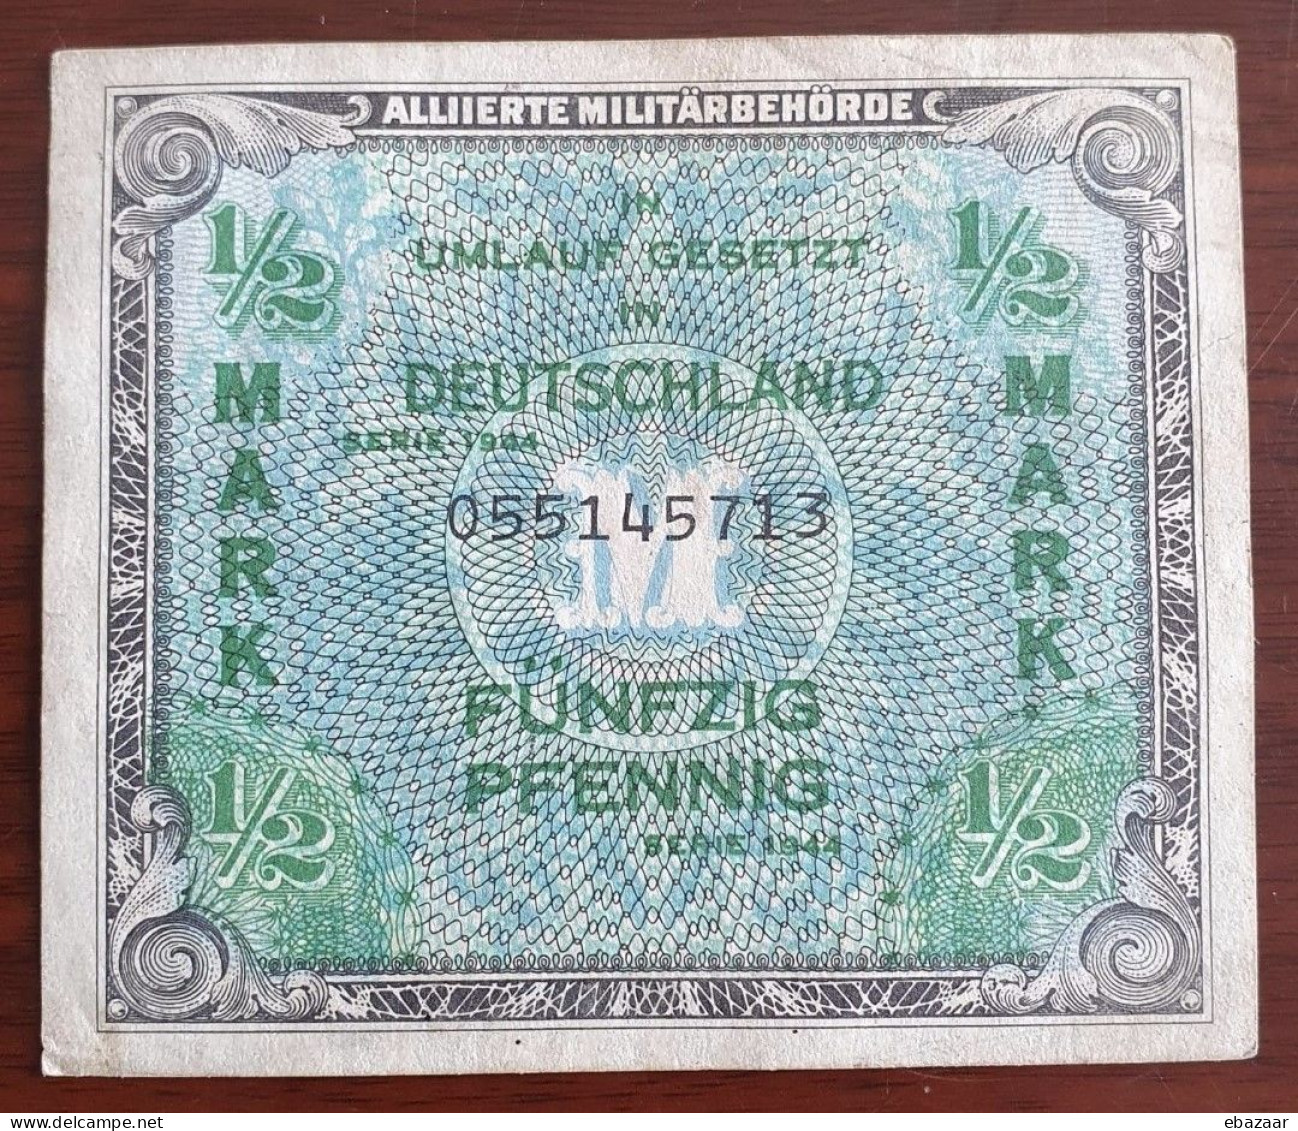 Germany 1944 Banknote Allies Occupation 1/2 Mark 50 Pfennig P-191a With Printer's Code "F"  Forbes Lithograph, Boston MA - 1/2 Mark